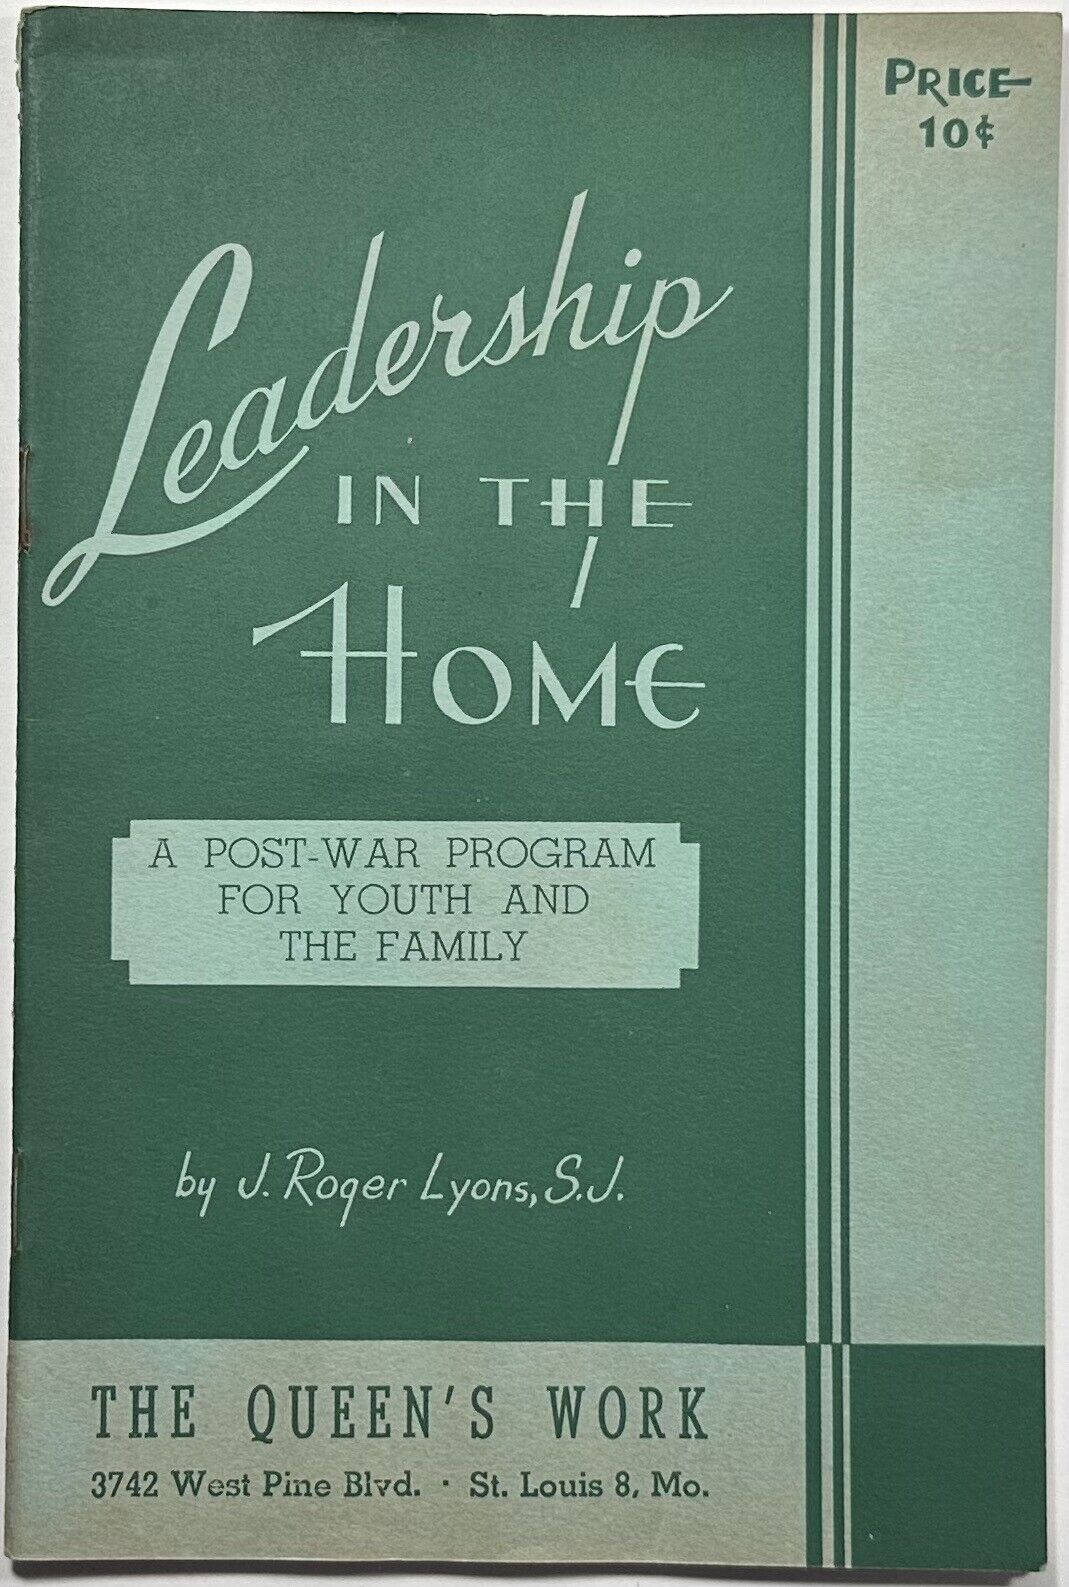 Leadership in the Home, Vintage WWII 1944 Holy Devotional Booklet.